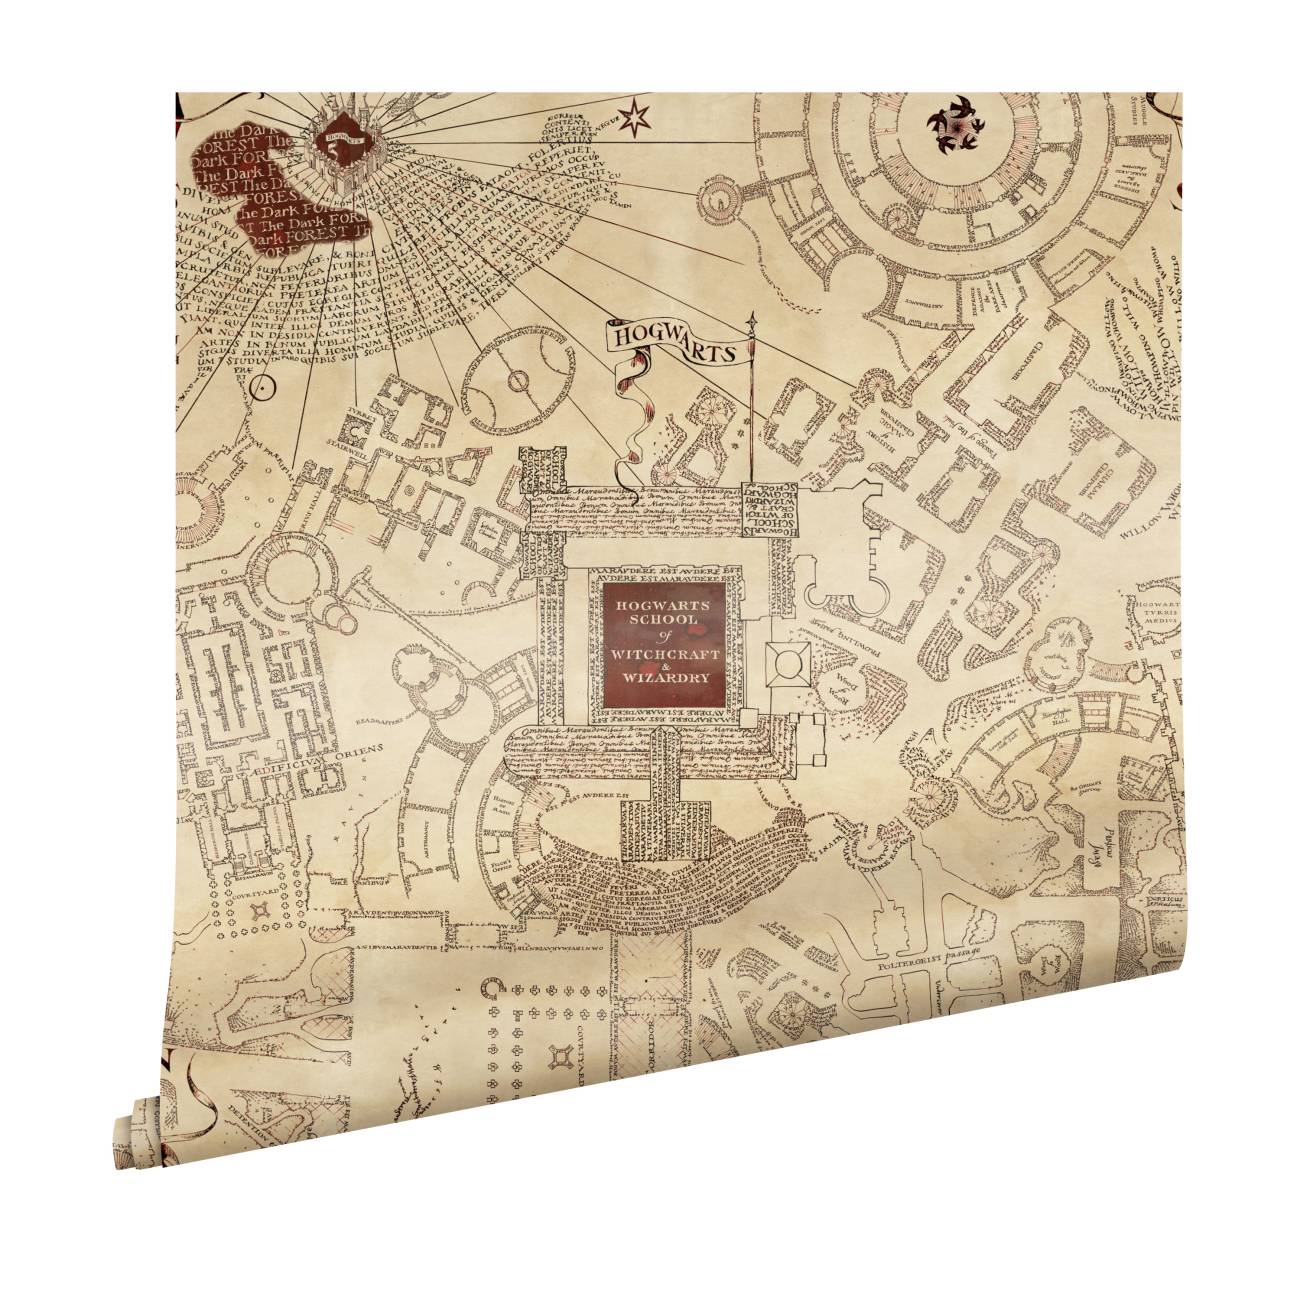 Harry Potter Marauders Map Wallpapers